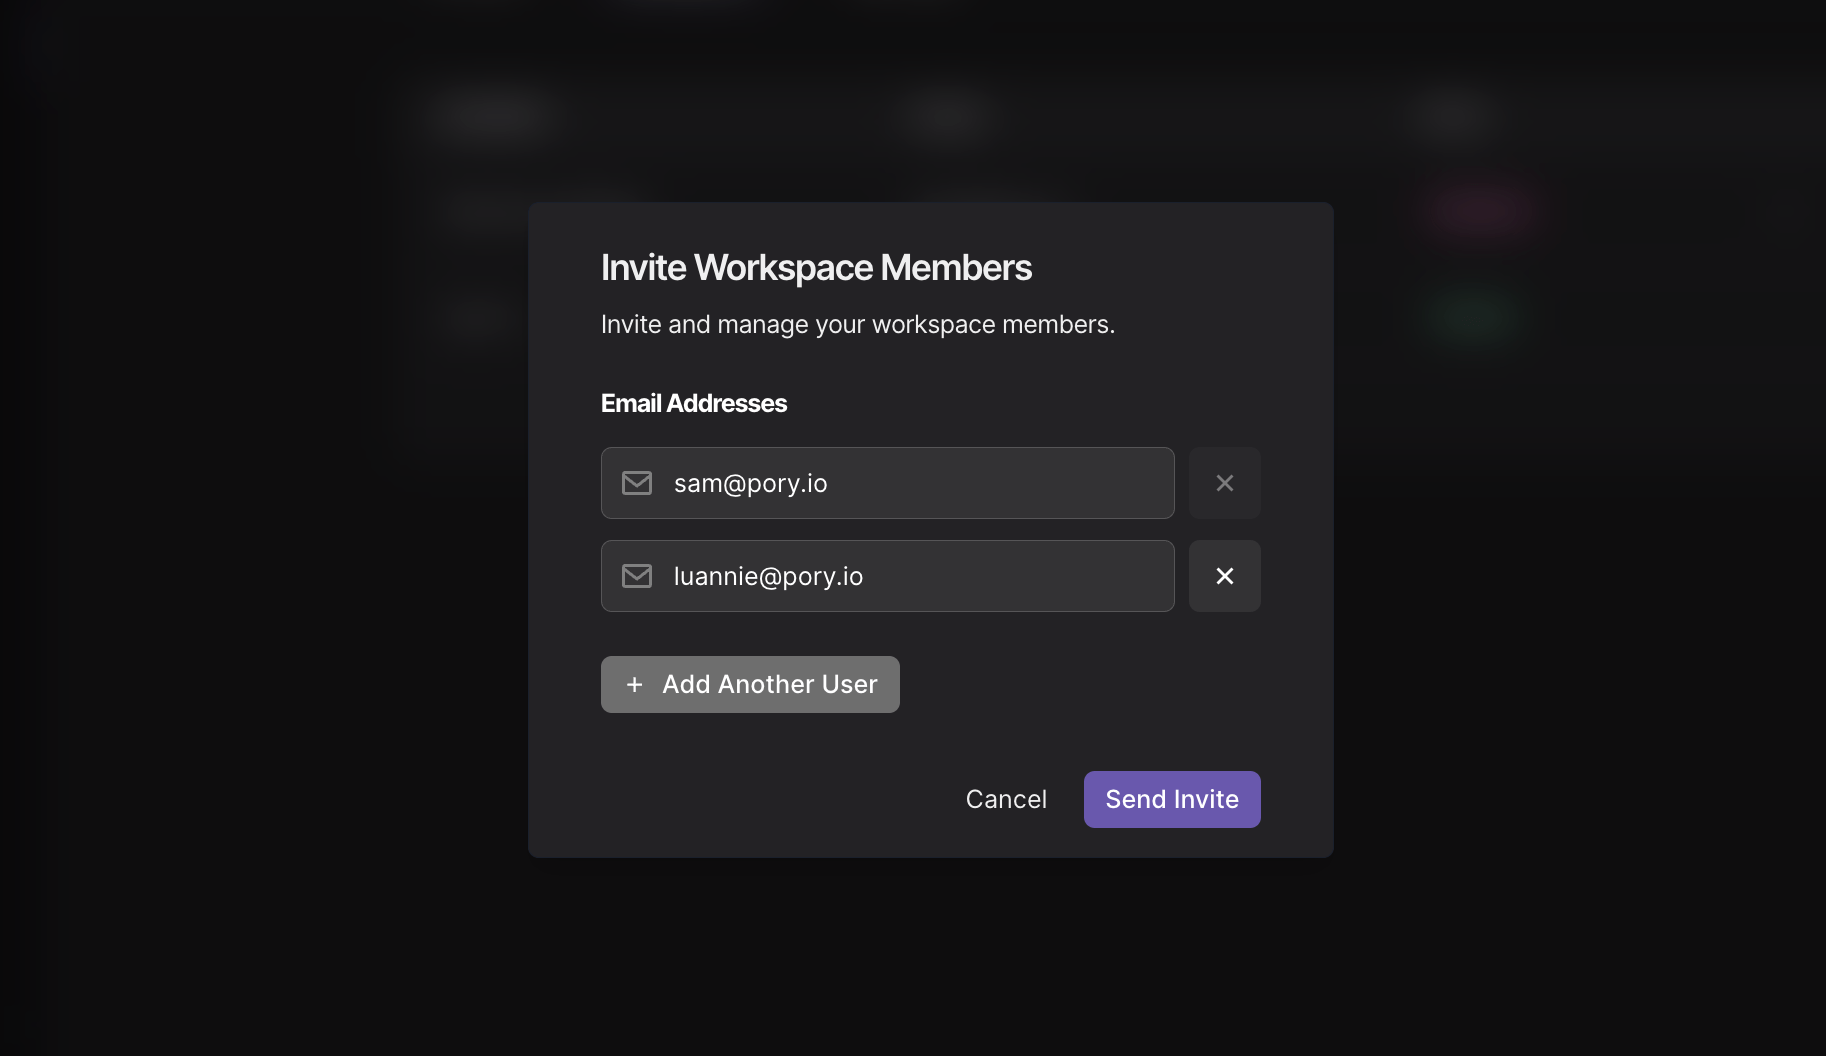 The Invite Workspace Members modal in Pory